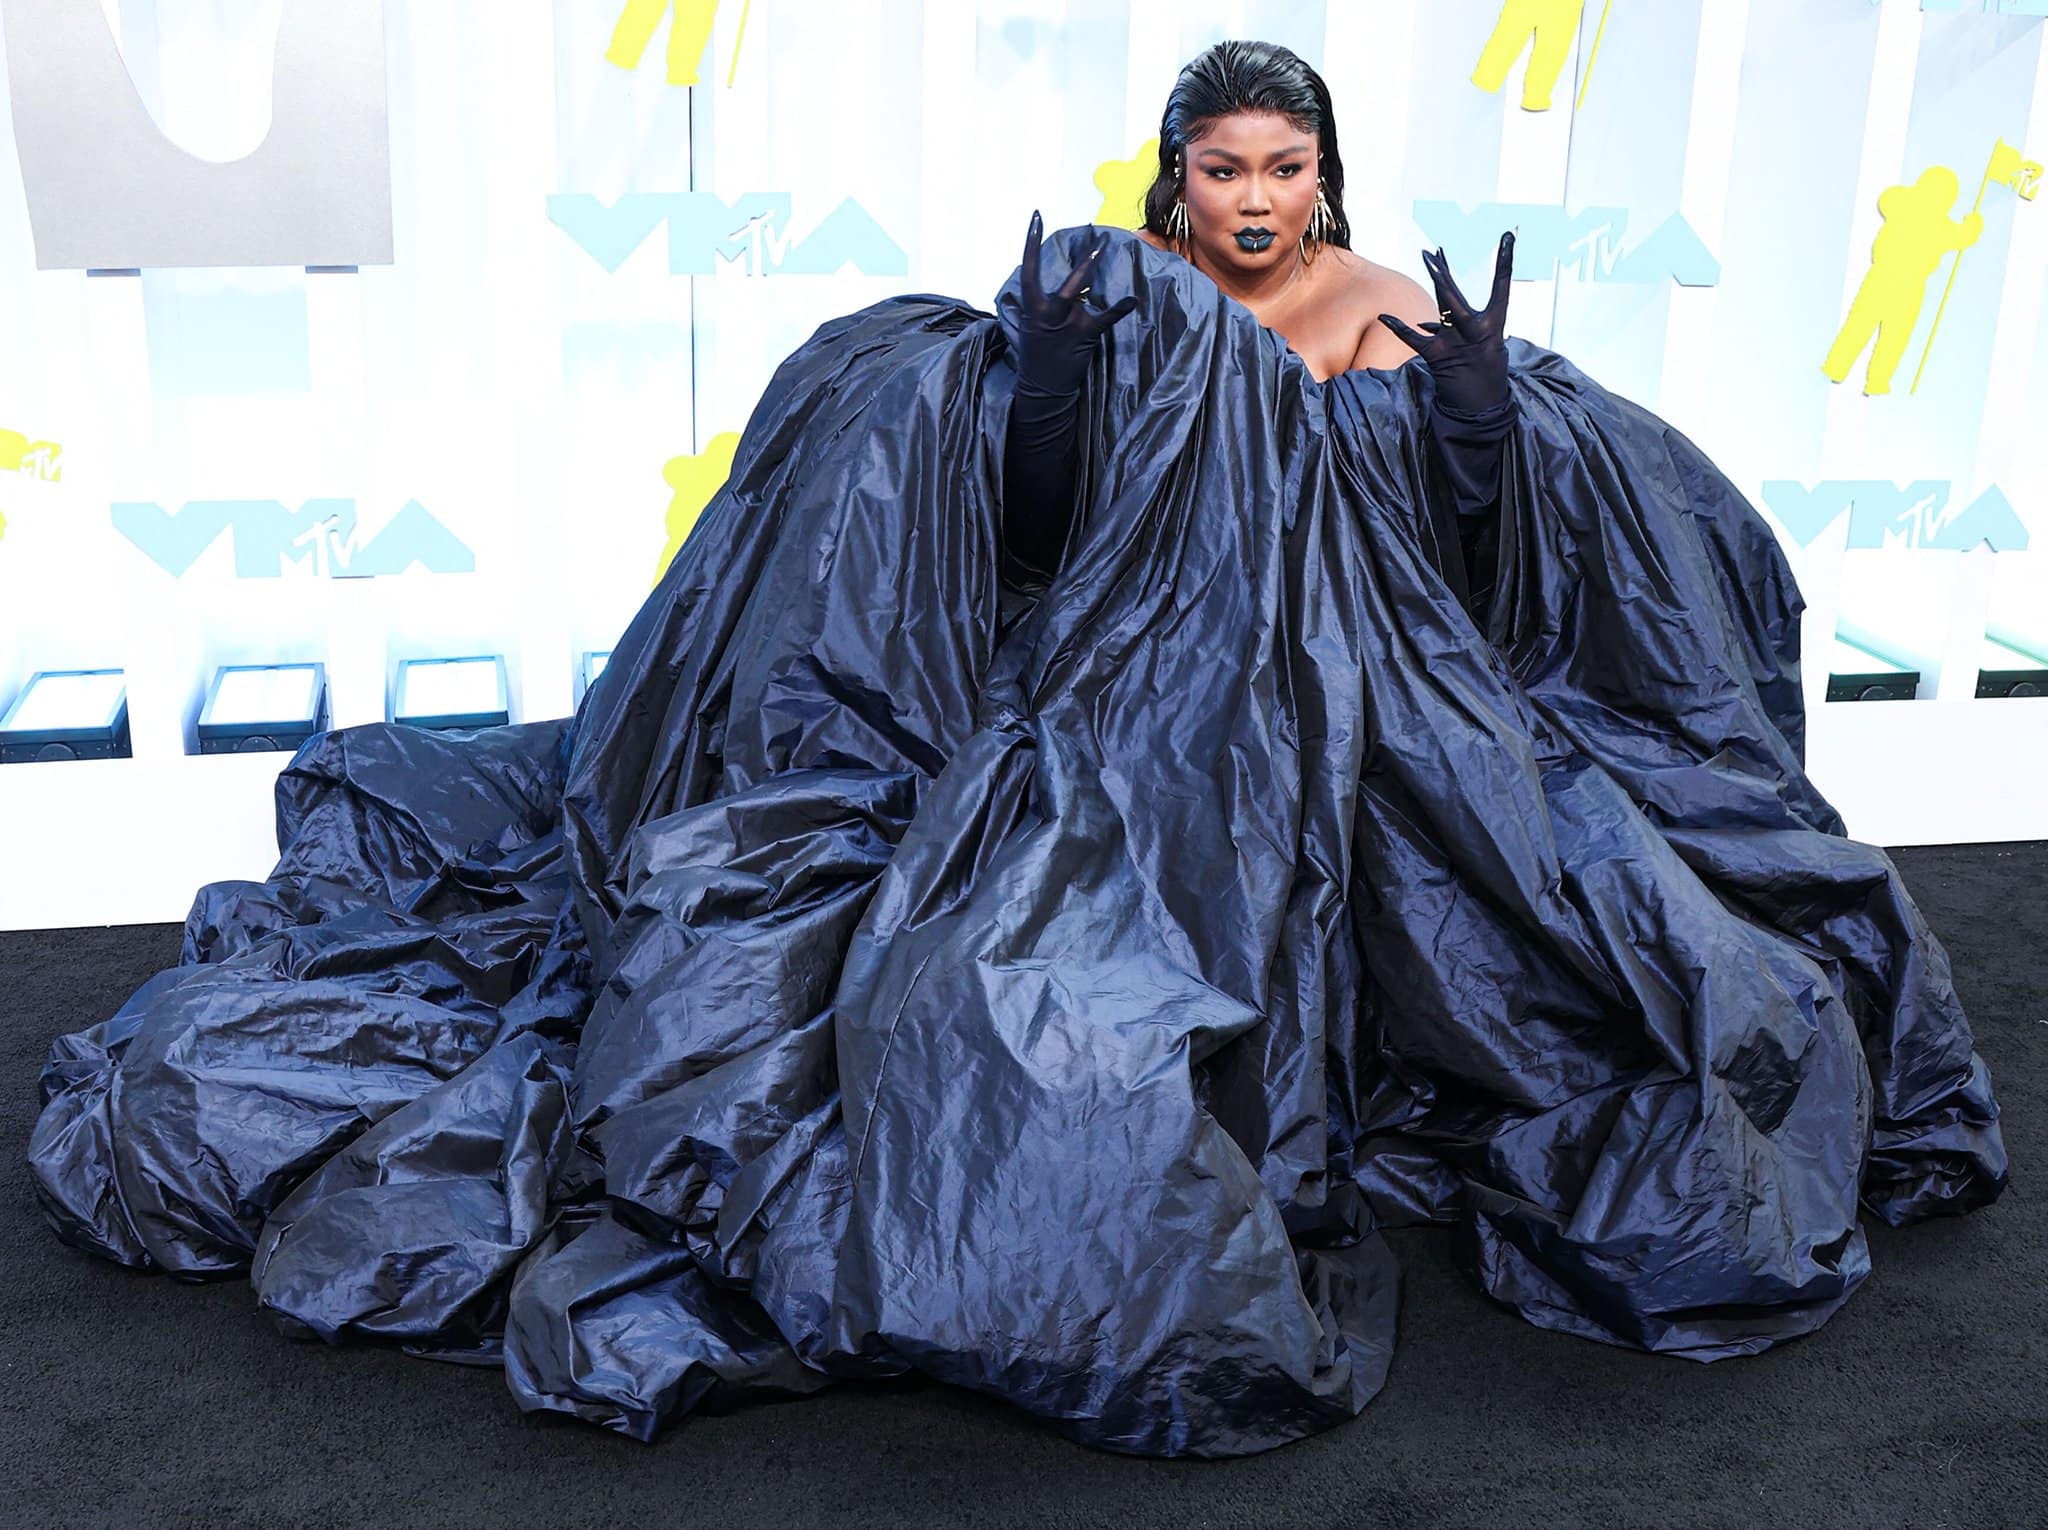 Lizzo pairs her supersized gown with black mesh opera gloves